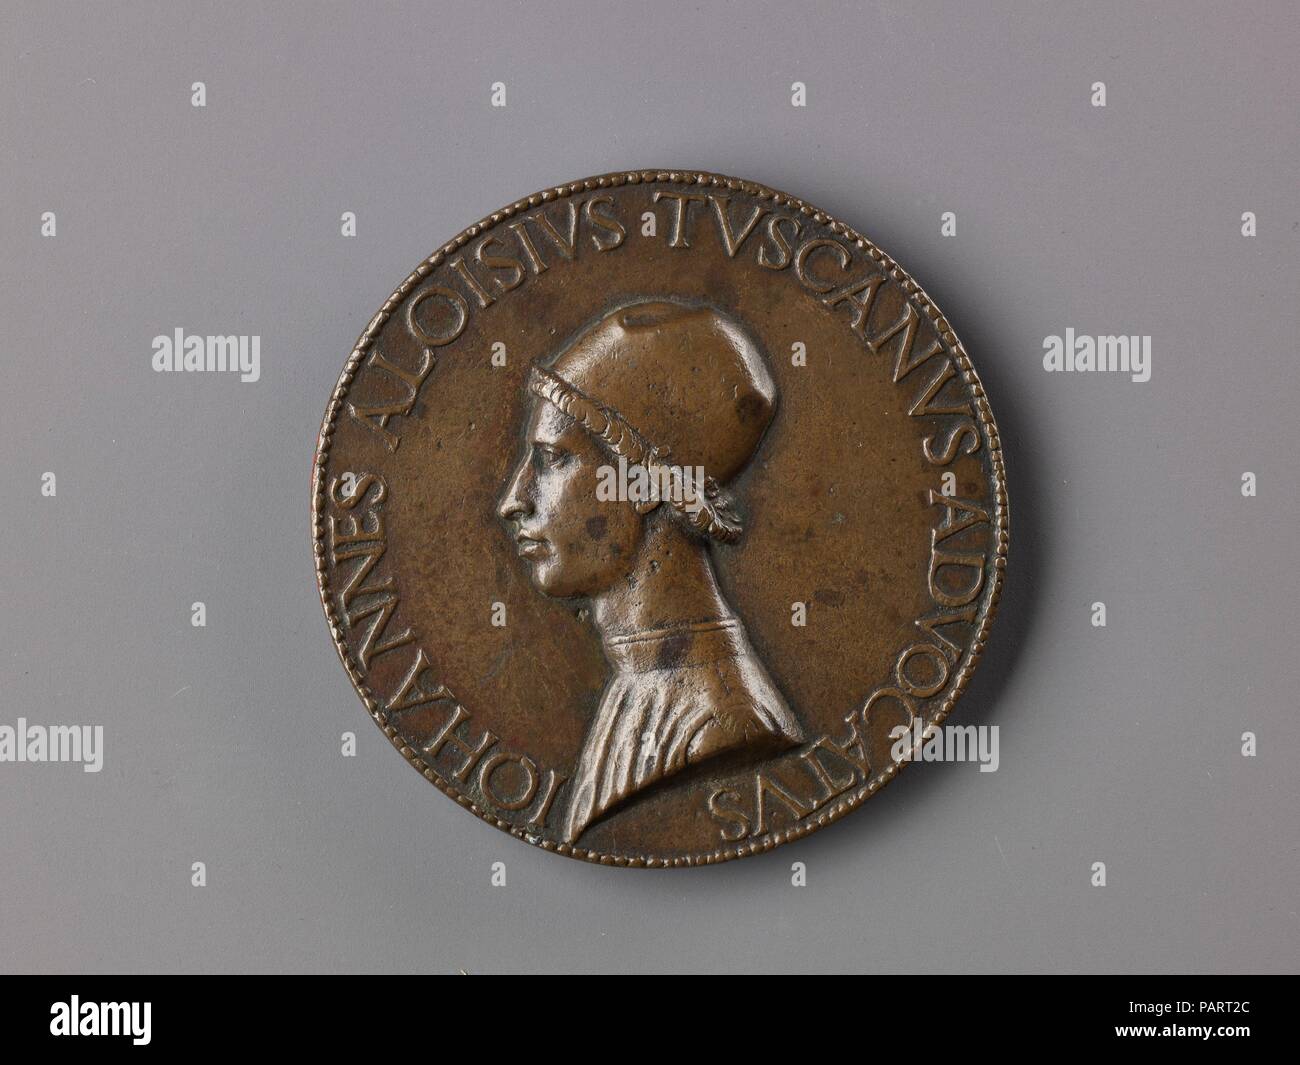 Portrait medal of Giovanni Alvise Toscani. Artist: Lysippus the Younger (Italian, active Rome, ca. 1470-84). Dimensions: Diam. 7.3 cm, wt. 107.3 g.. Date: ca. 1475 (possibly cast early 16th century).  Milanese by birth, Giovanni Alvise Toscani was a lawyer, orator, and Latin poet. He began his career under Francesco I Sforza, Duke of Milan, before going to Rome in 1468, where he became advocate to the assembly of cardinals and auditor under Pope Sixtus IV. Lysippus made six medals of Toscani, indicating their close friendship; this example is the largest and finest.  The reverse contains a lau Stock Photo